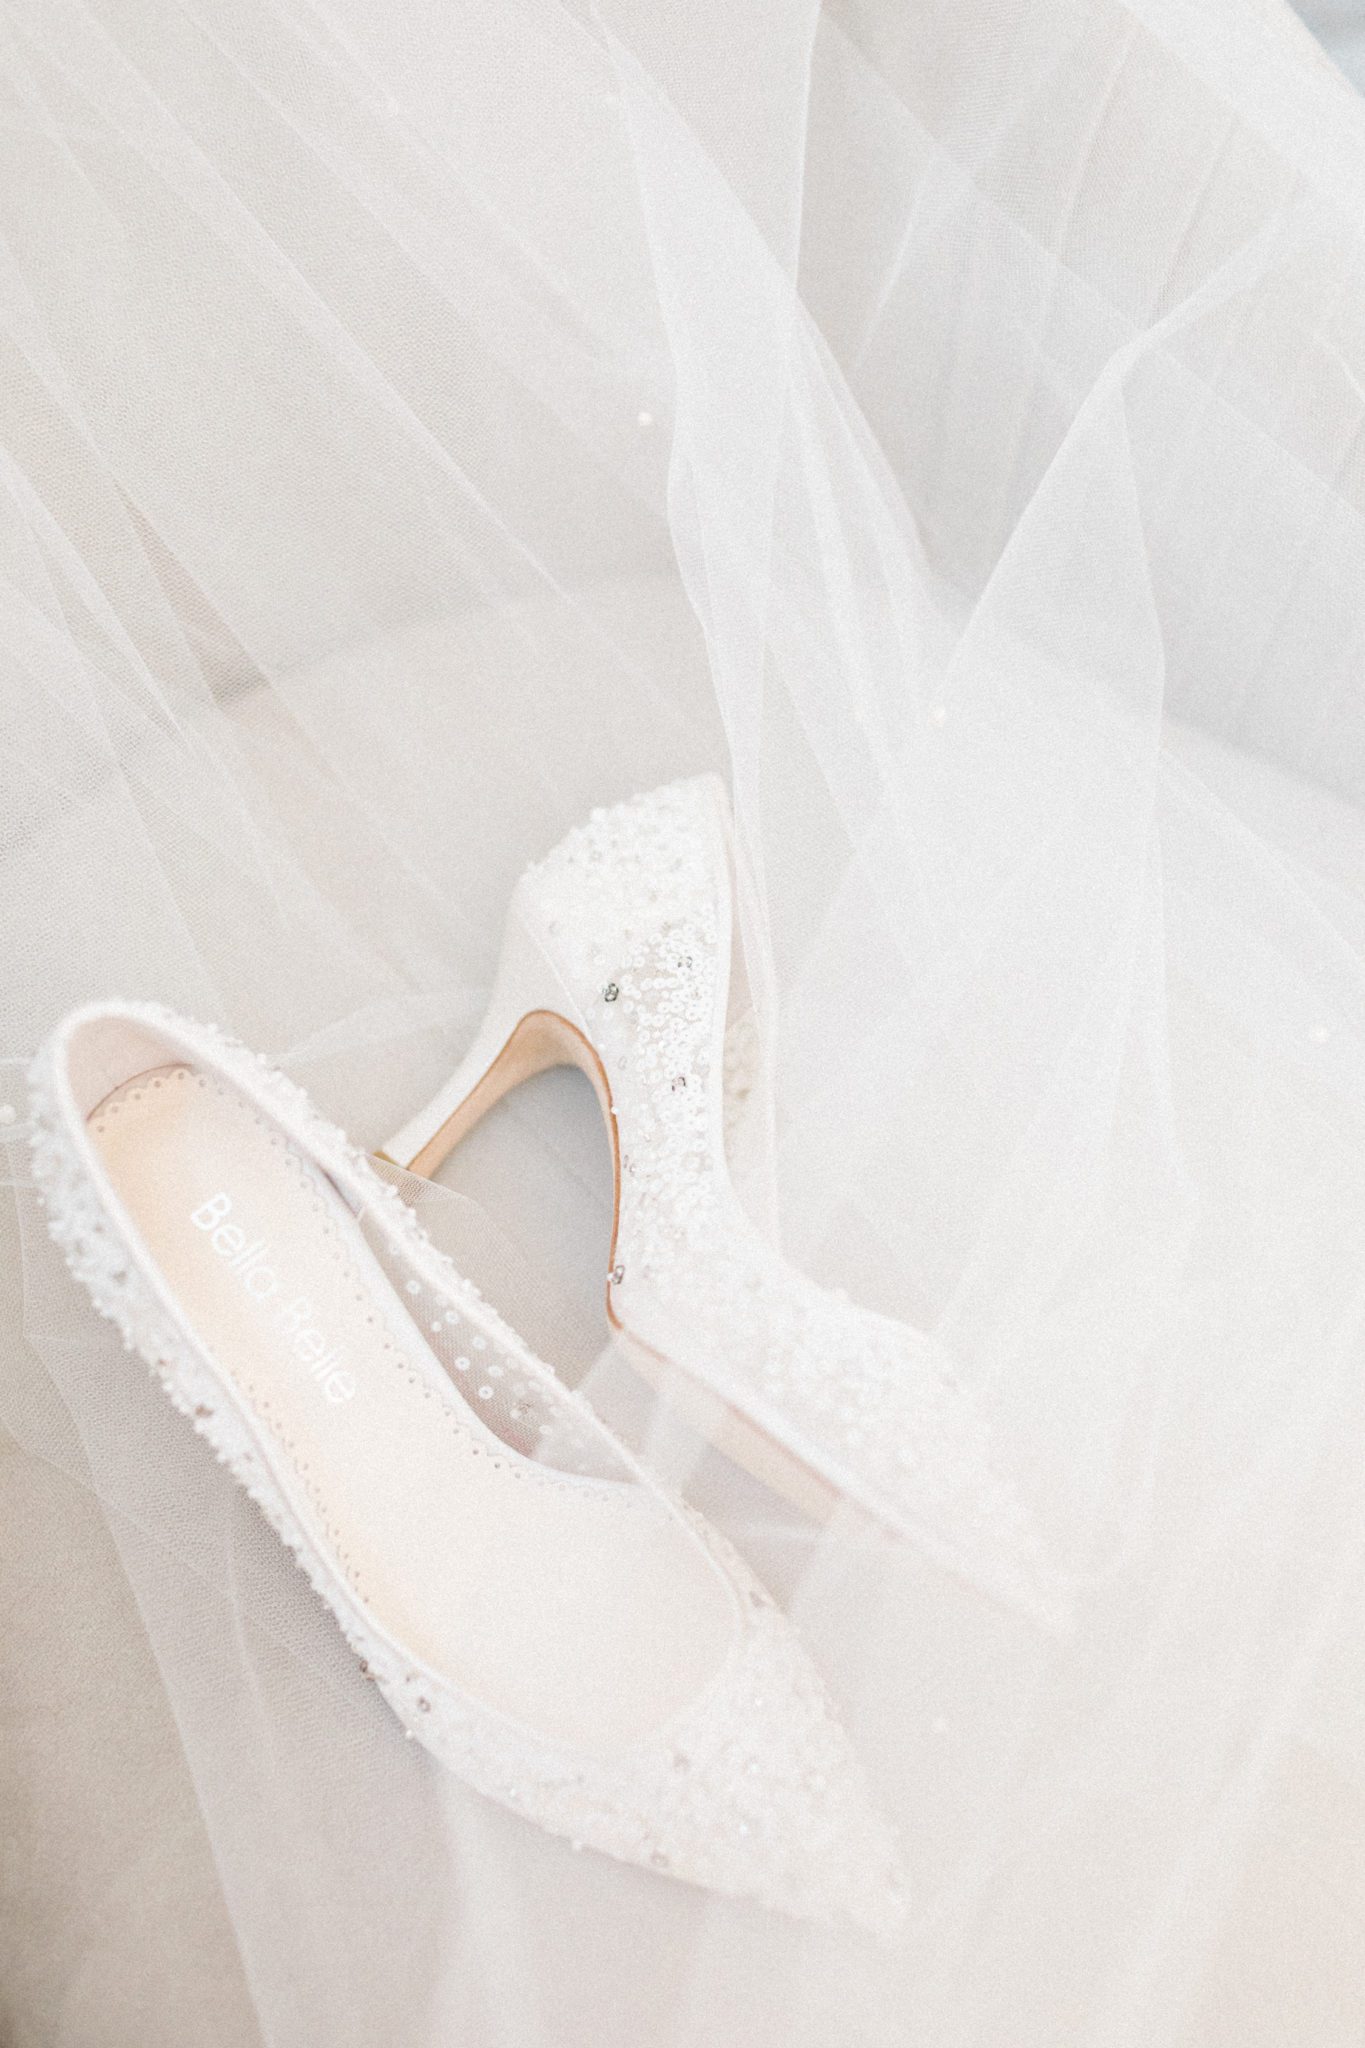 White bridal high heels photographed with bridal veil